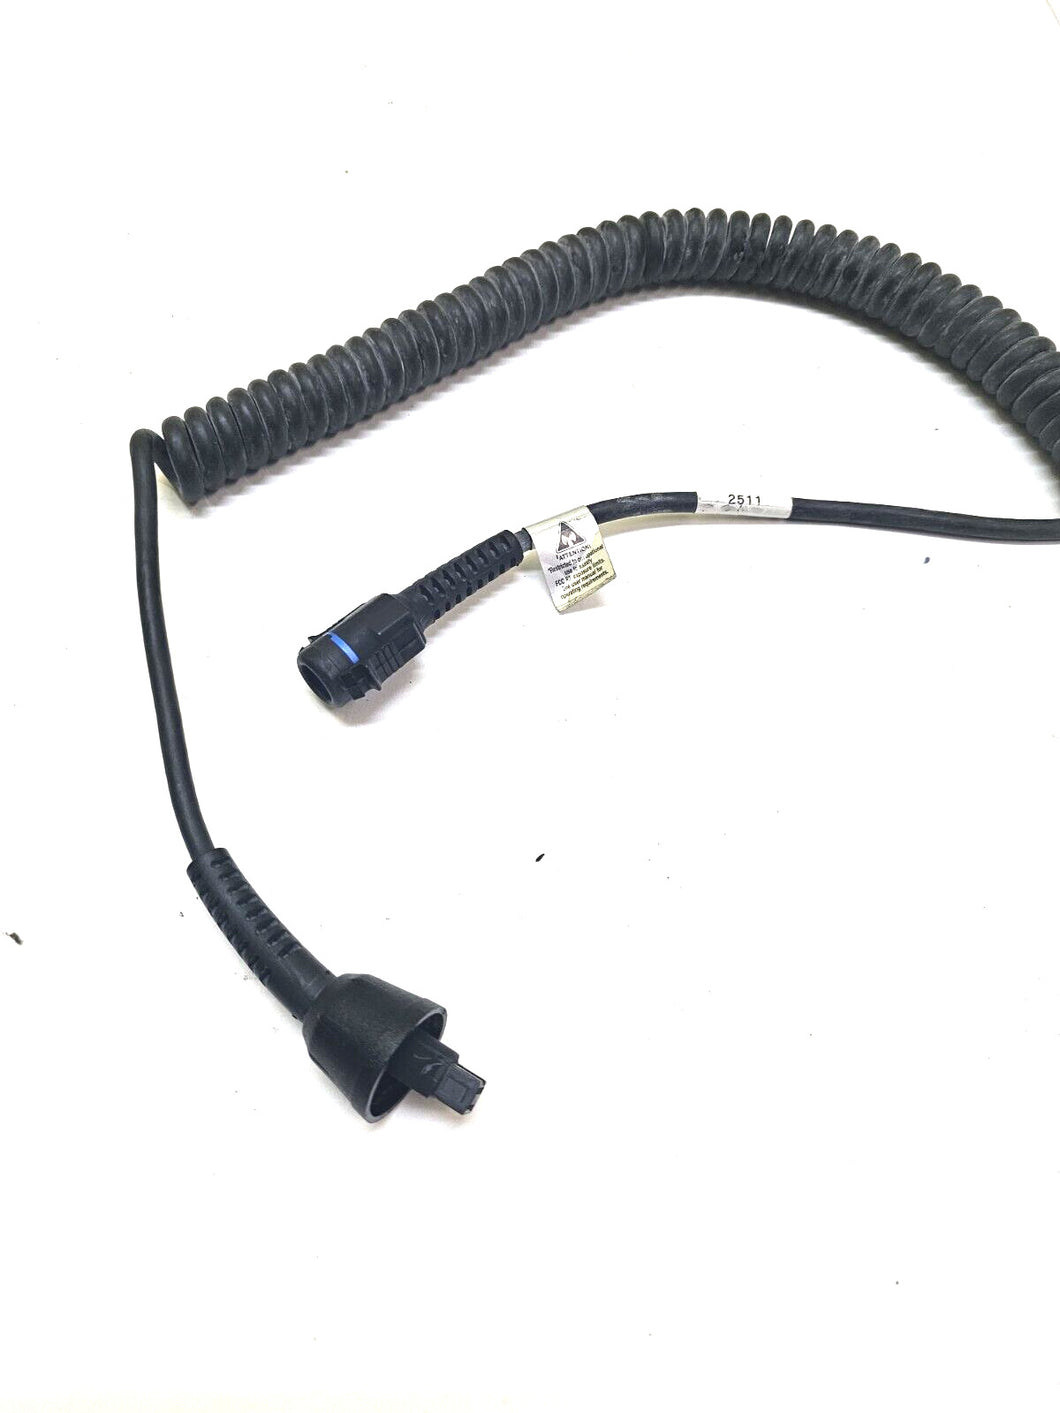 OEM Motorola PMLN4961B O3 APX Radio Hand Held Control Head Replacement Cable